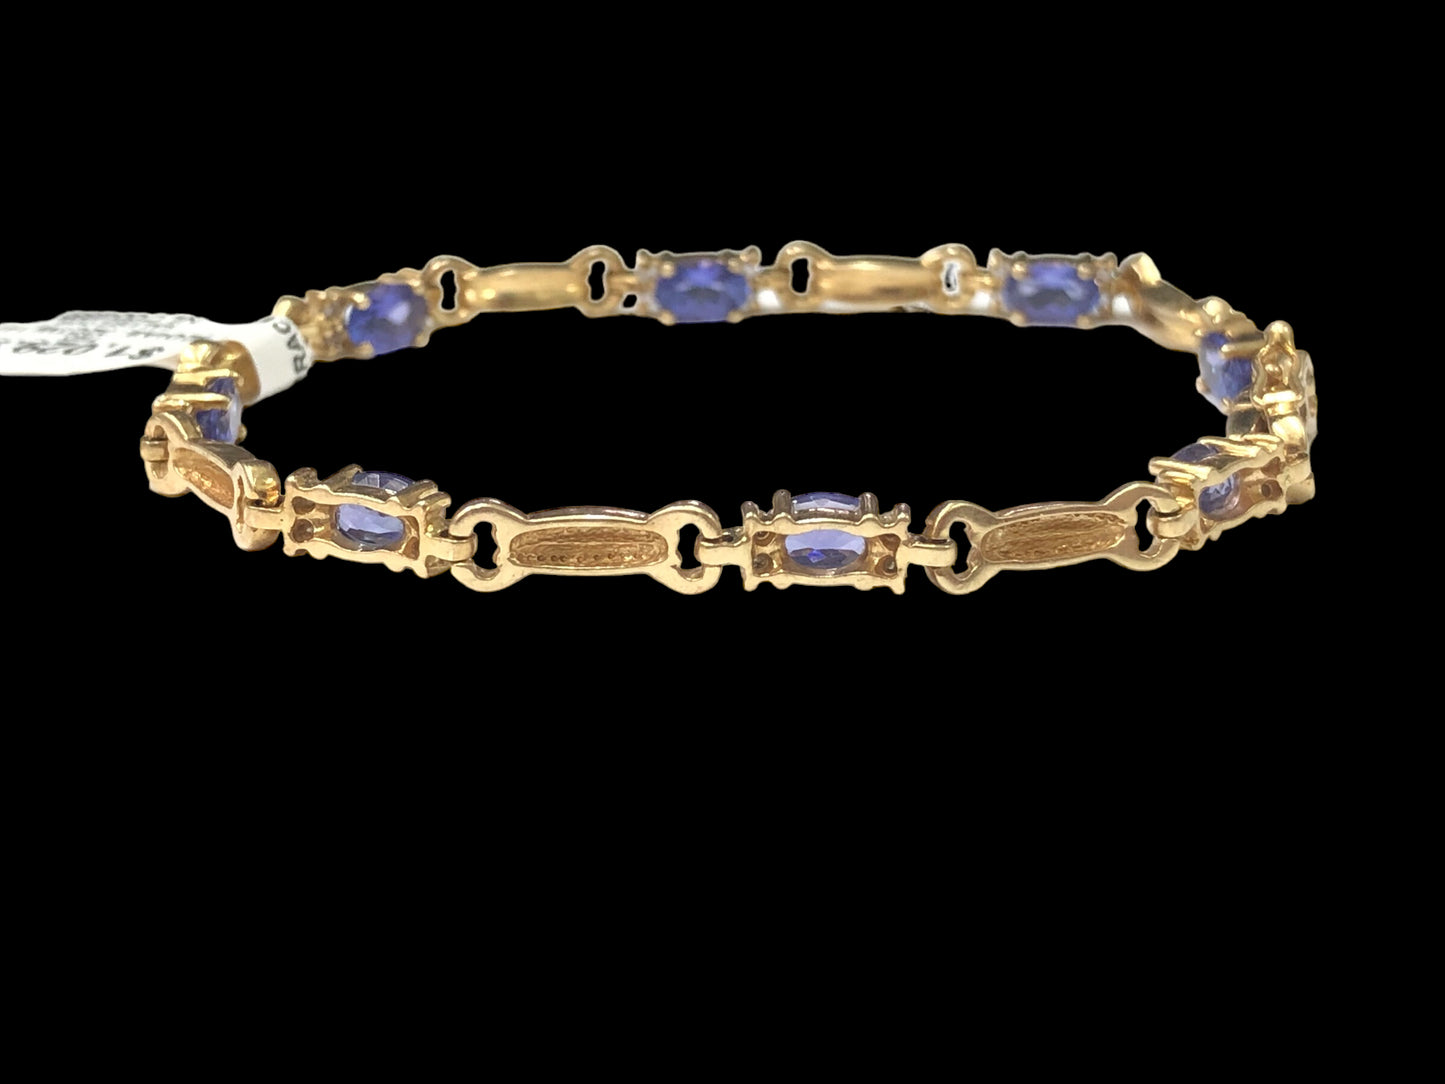 14K Yellow Gold Diamond and Purple Stone Bracelet (7 Inches) (Local pick-up only)